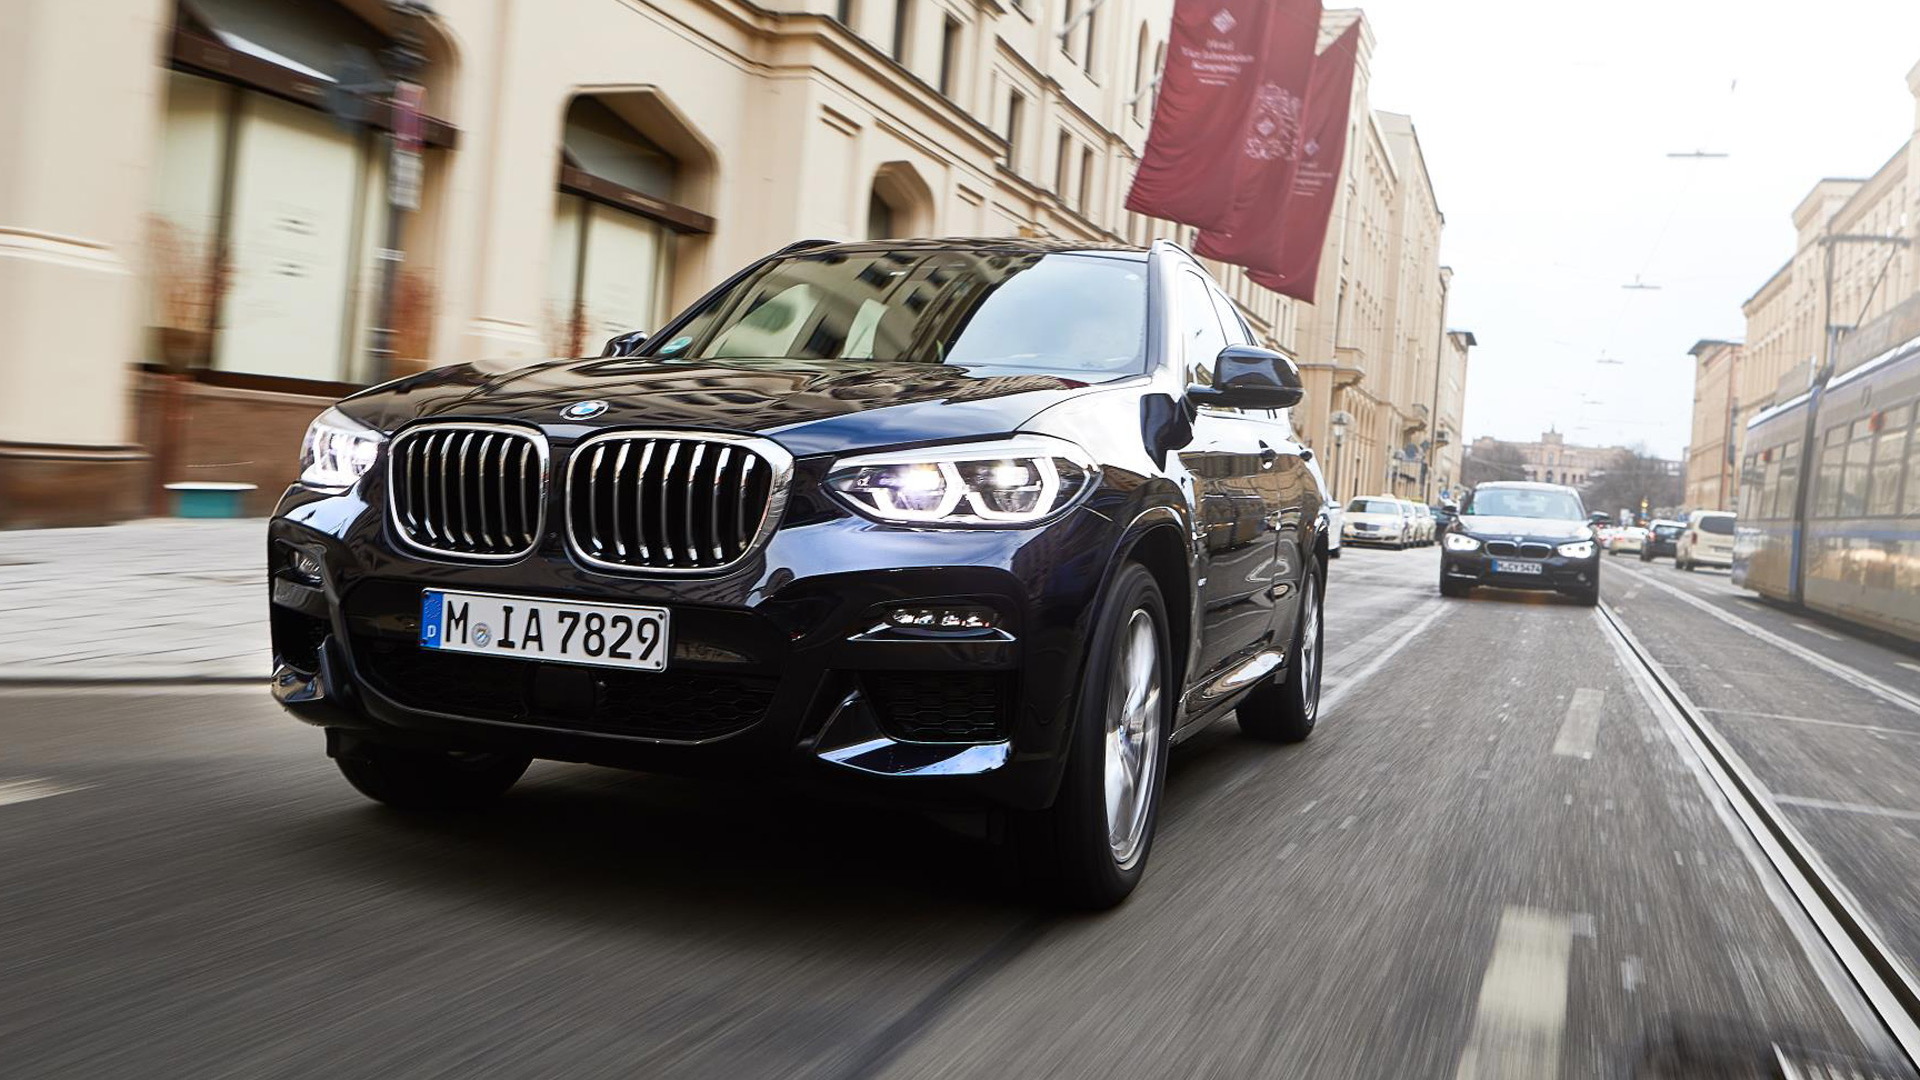 Bmw X3 Xdrive 30e Builds Out Plug In Hybrid Lineup